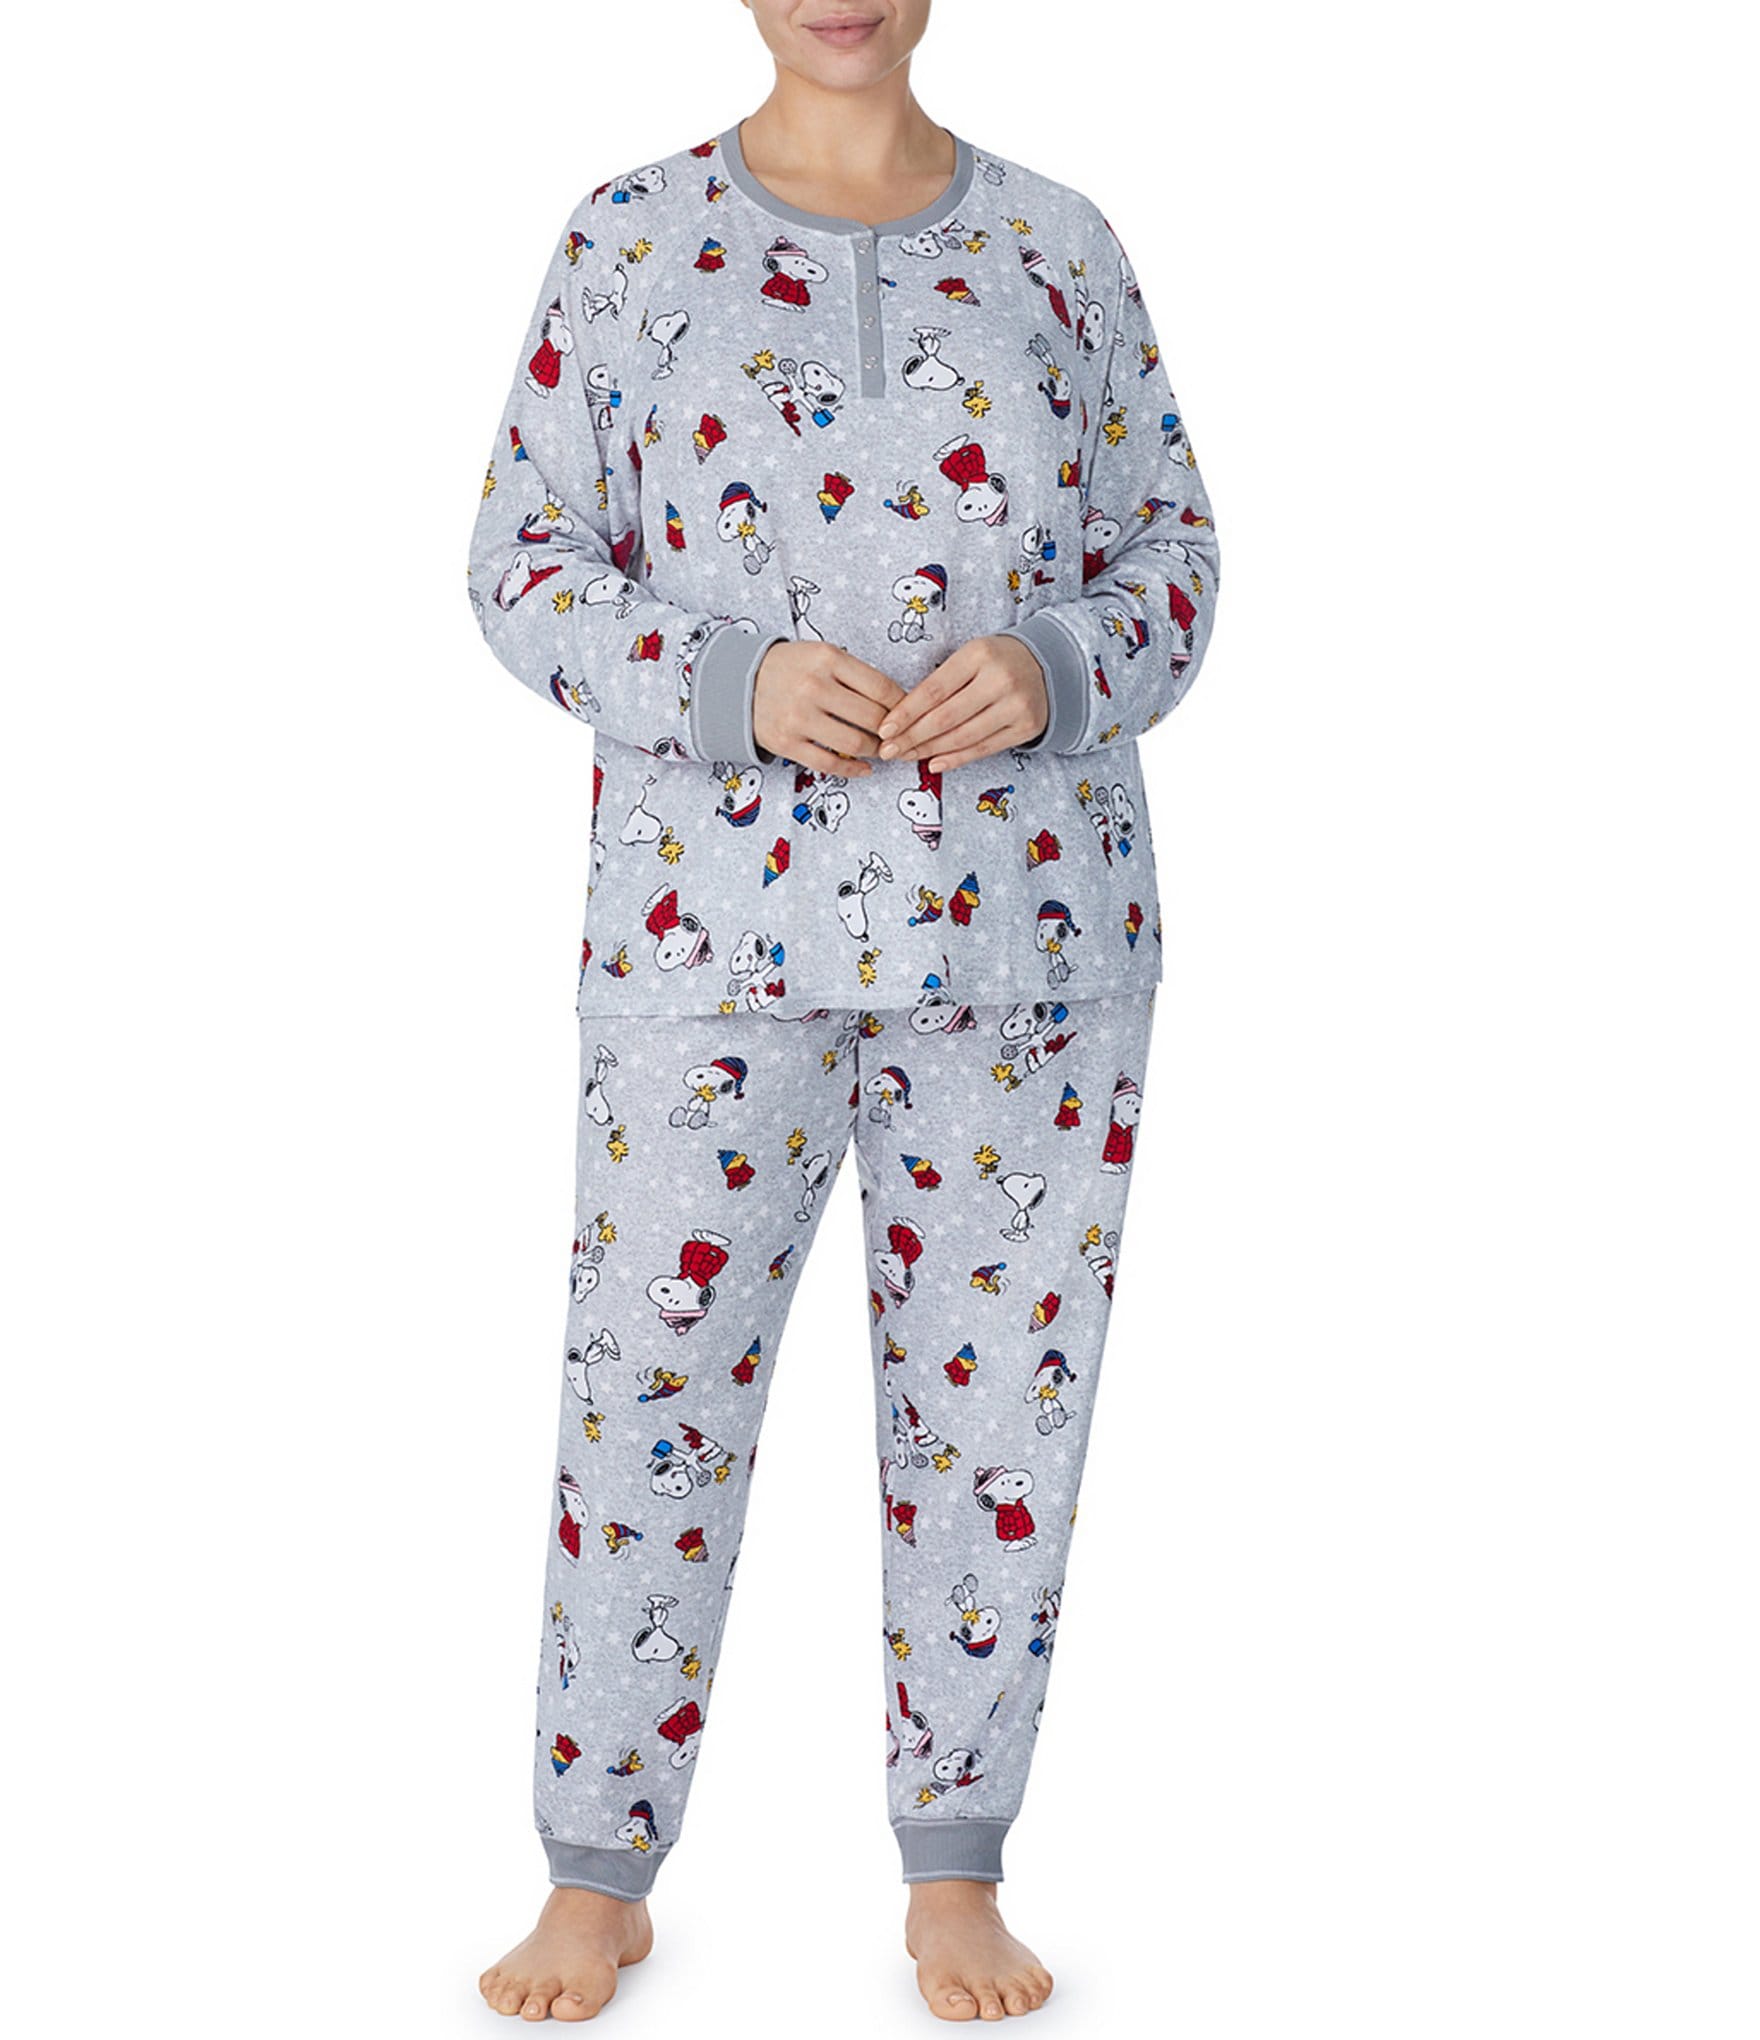 Snoopy Home Pajama Pants for Women